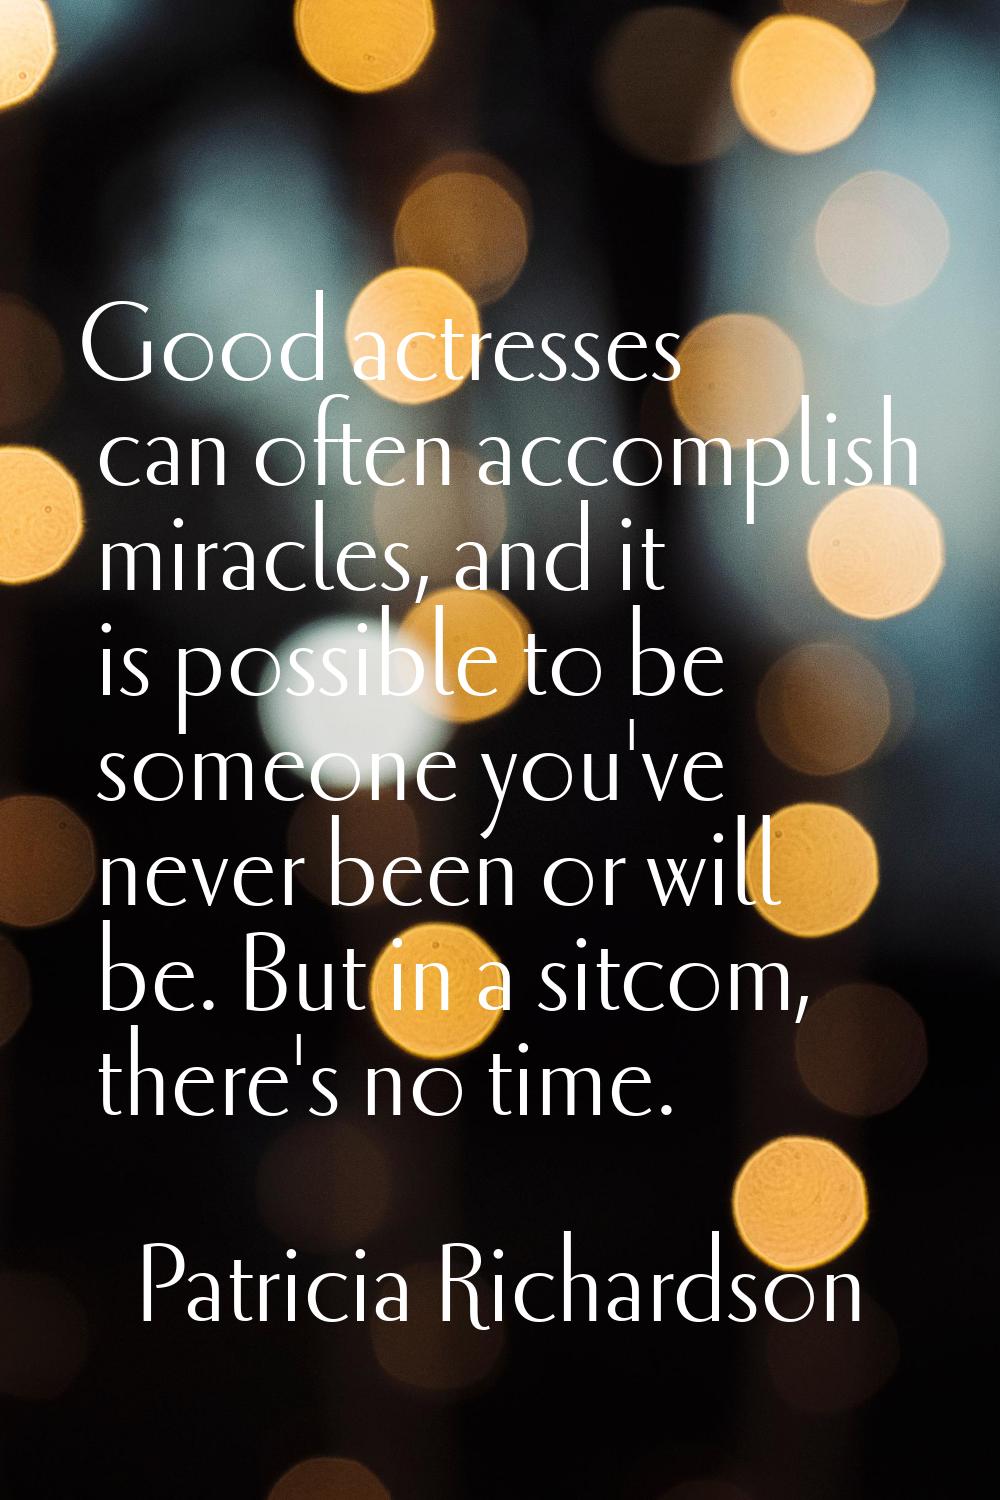 Good actresses can often accomplish miracles, and it is possible to be someone you've never been or